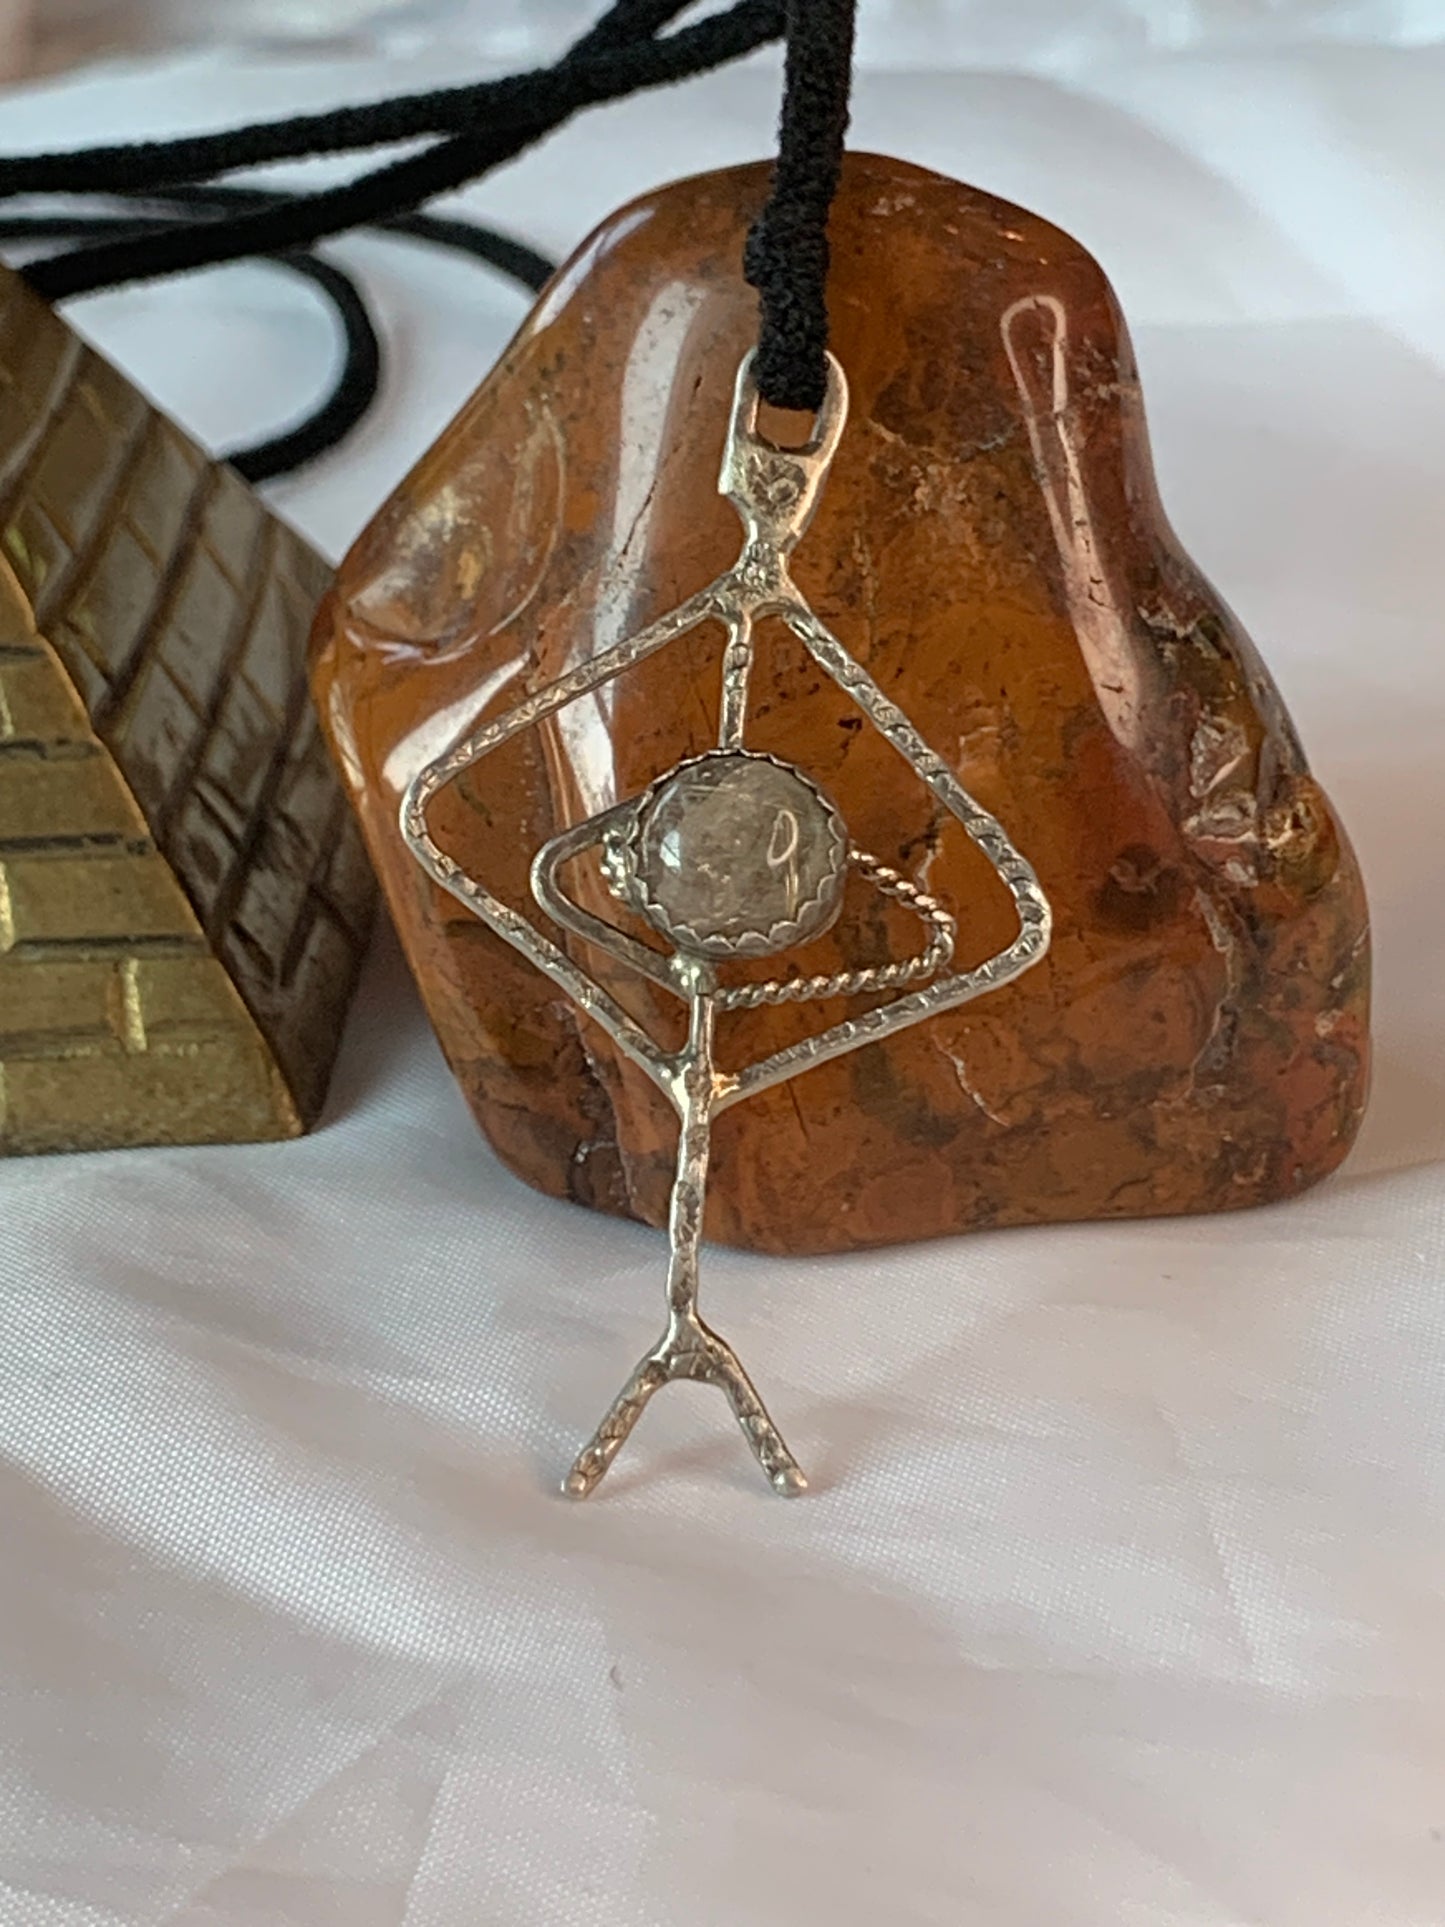 The pendant showcases a Rutilated Quartz cabochon, hand-set in a sterling silver Viking rune-inspired design.